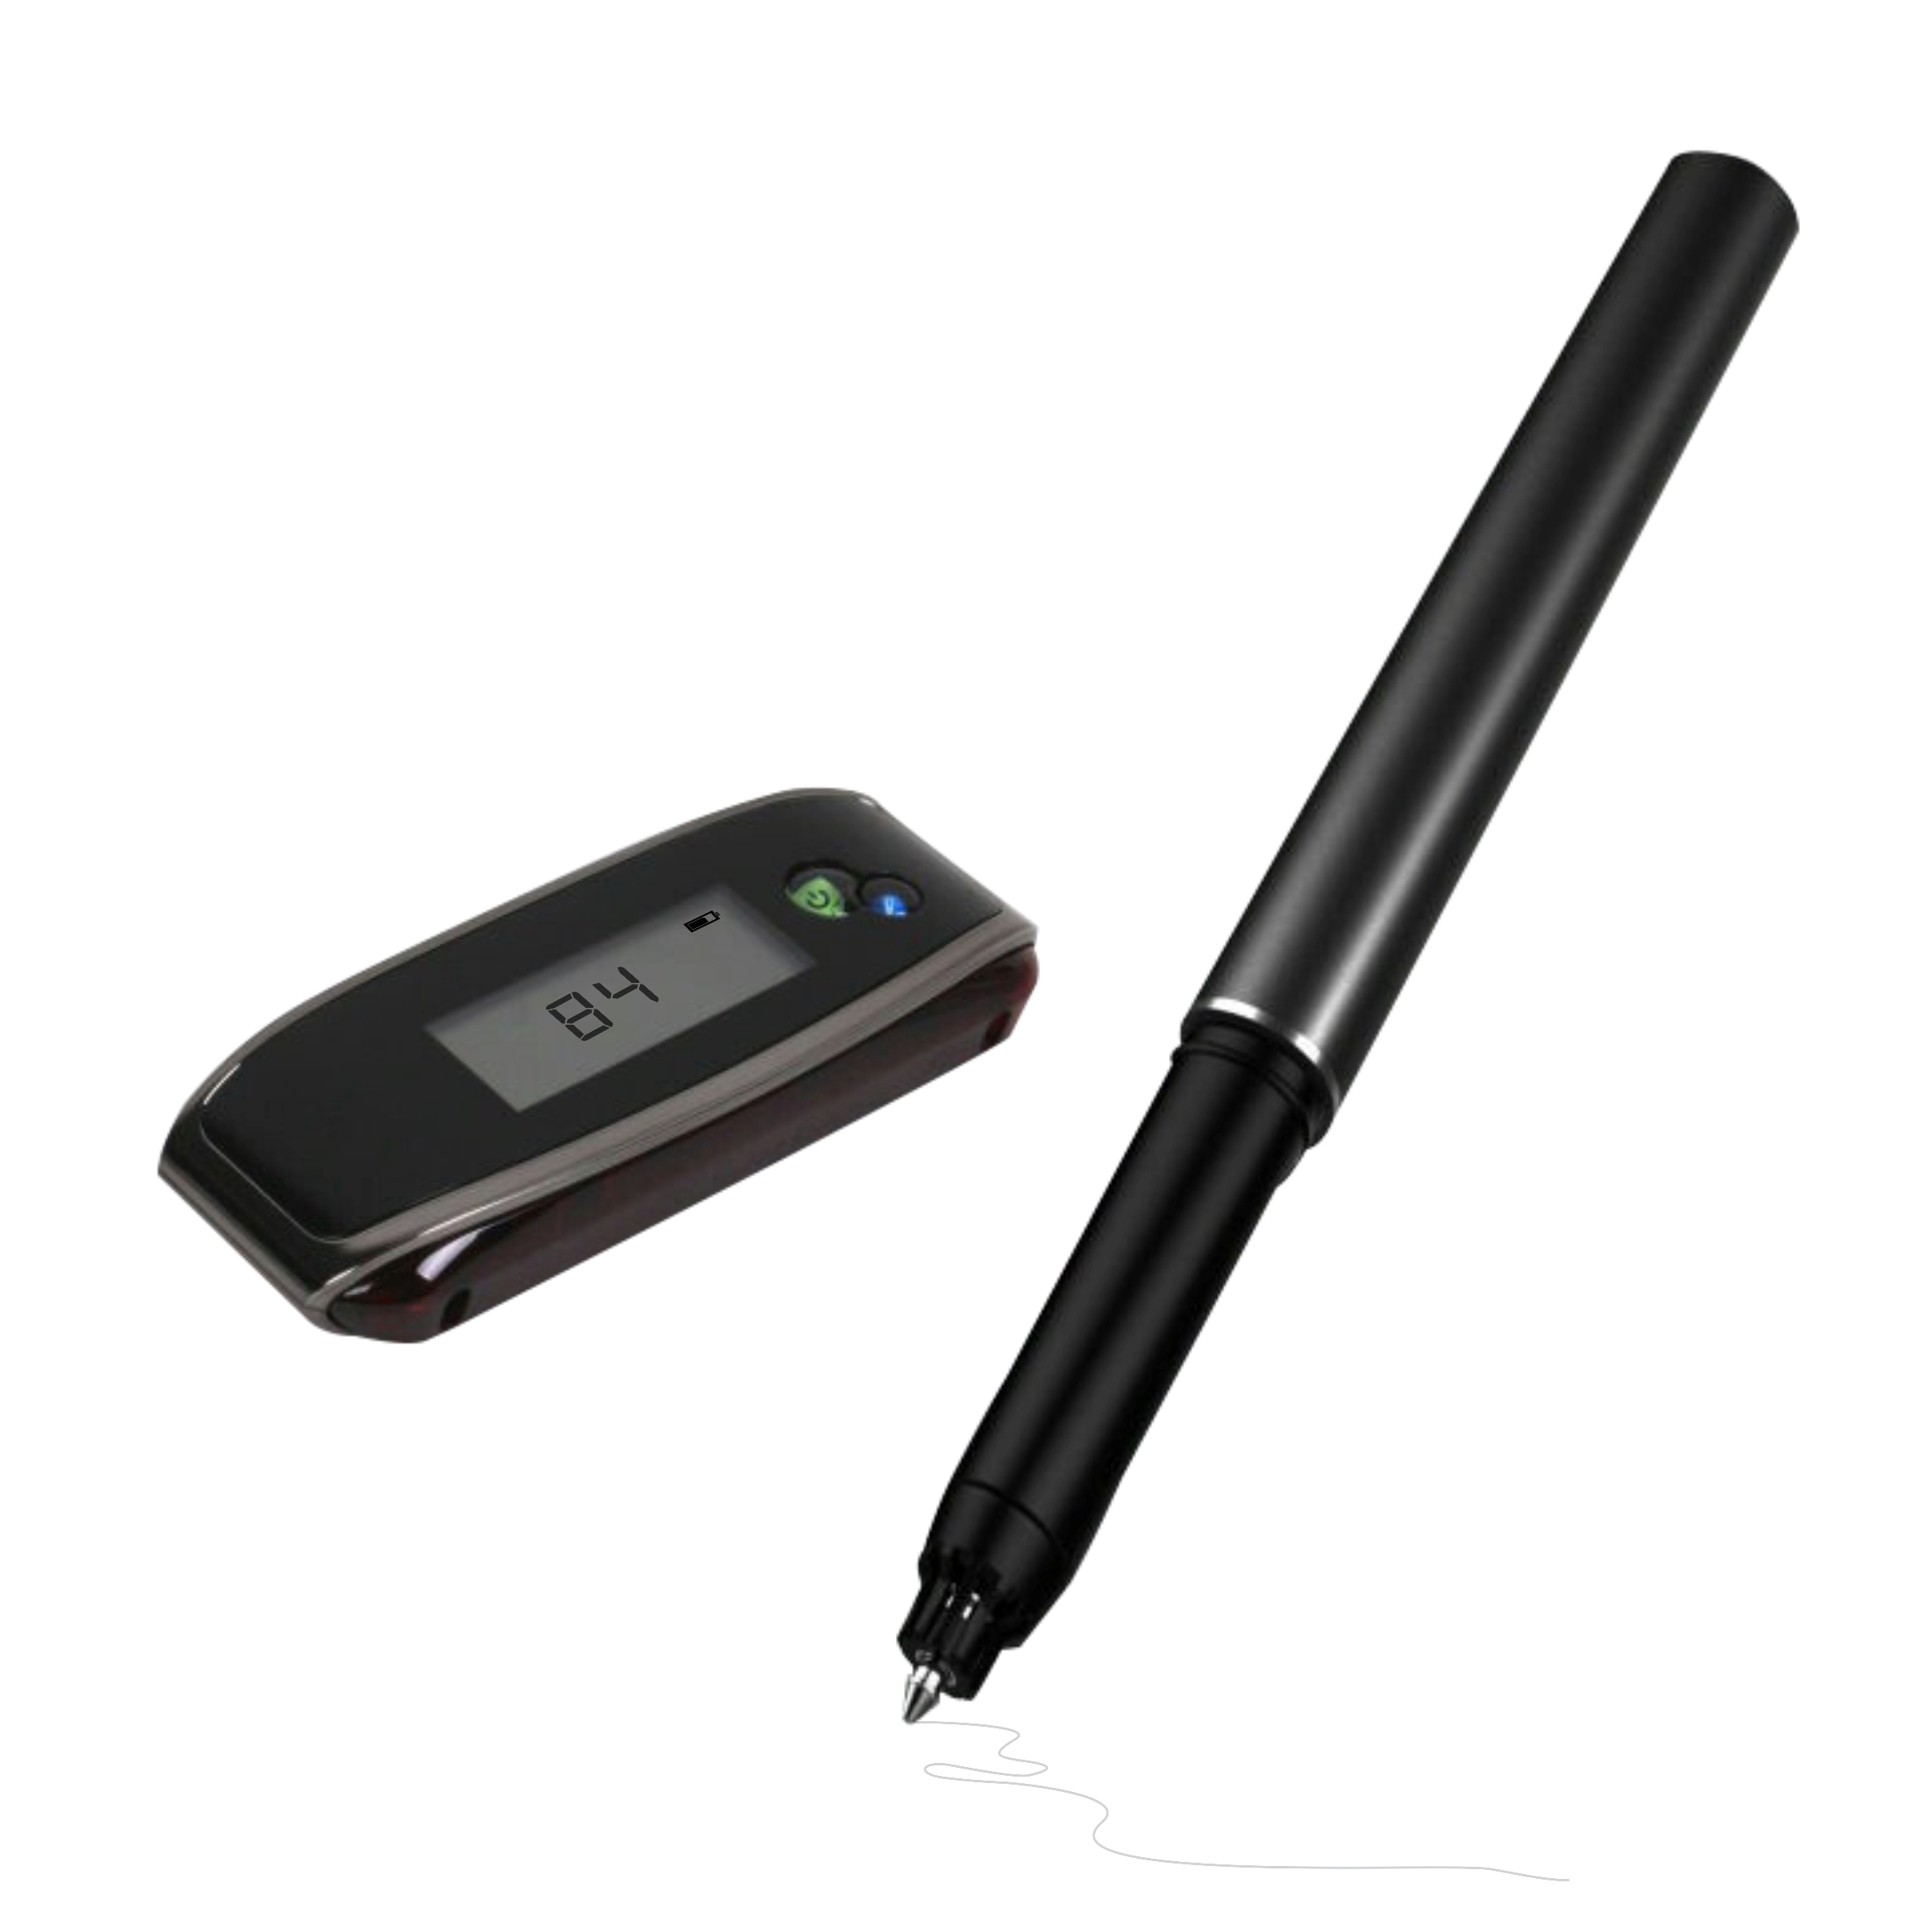 You are currently viewing Create Magic by Digitally Recording and Sharing your Hand-Written Notes and Sketches with  Digital Pen from Portronics: Electropen 4